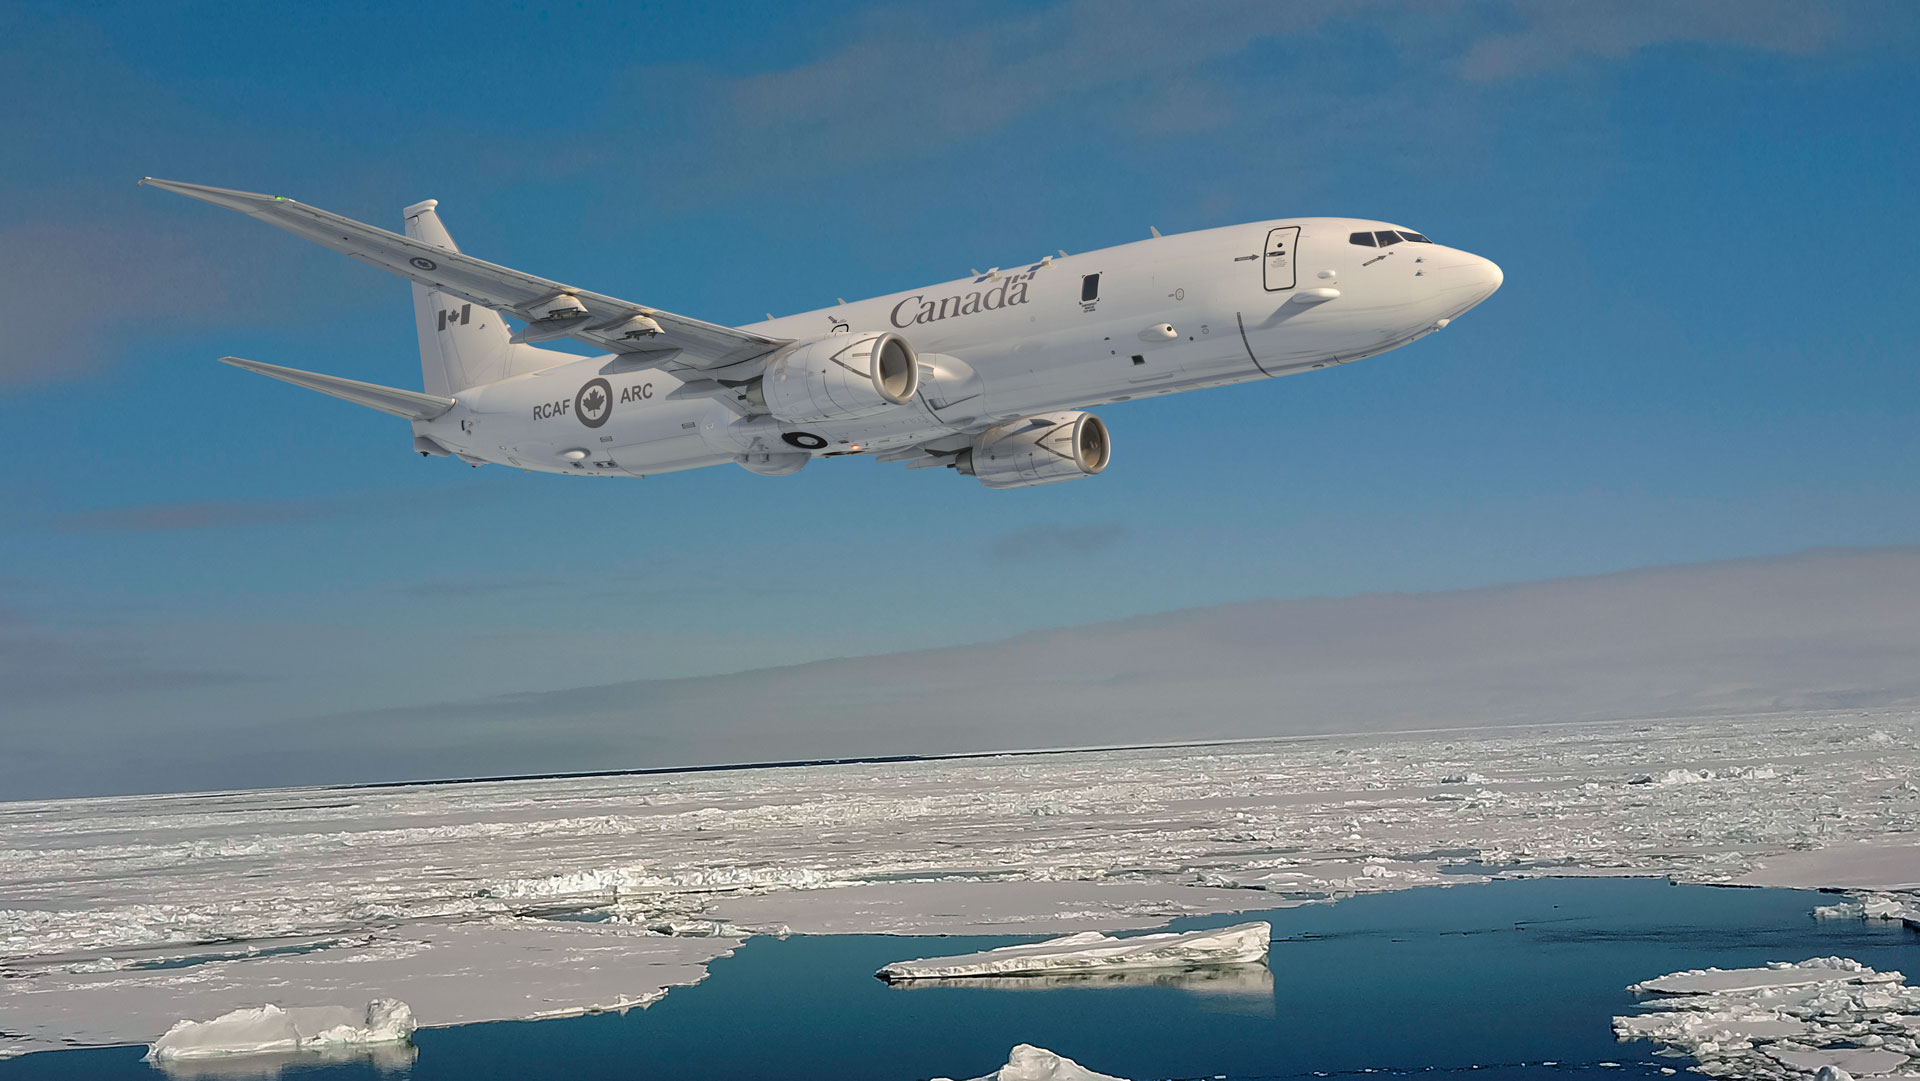 Exclusive auxiliary fuel tank supplier for P-8 Poseidon maritime patrol aircraft